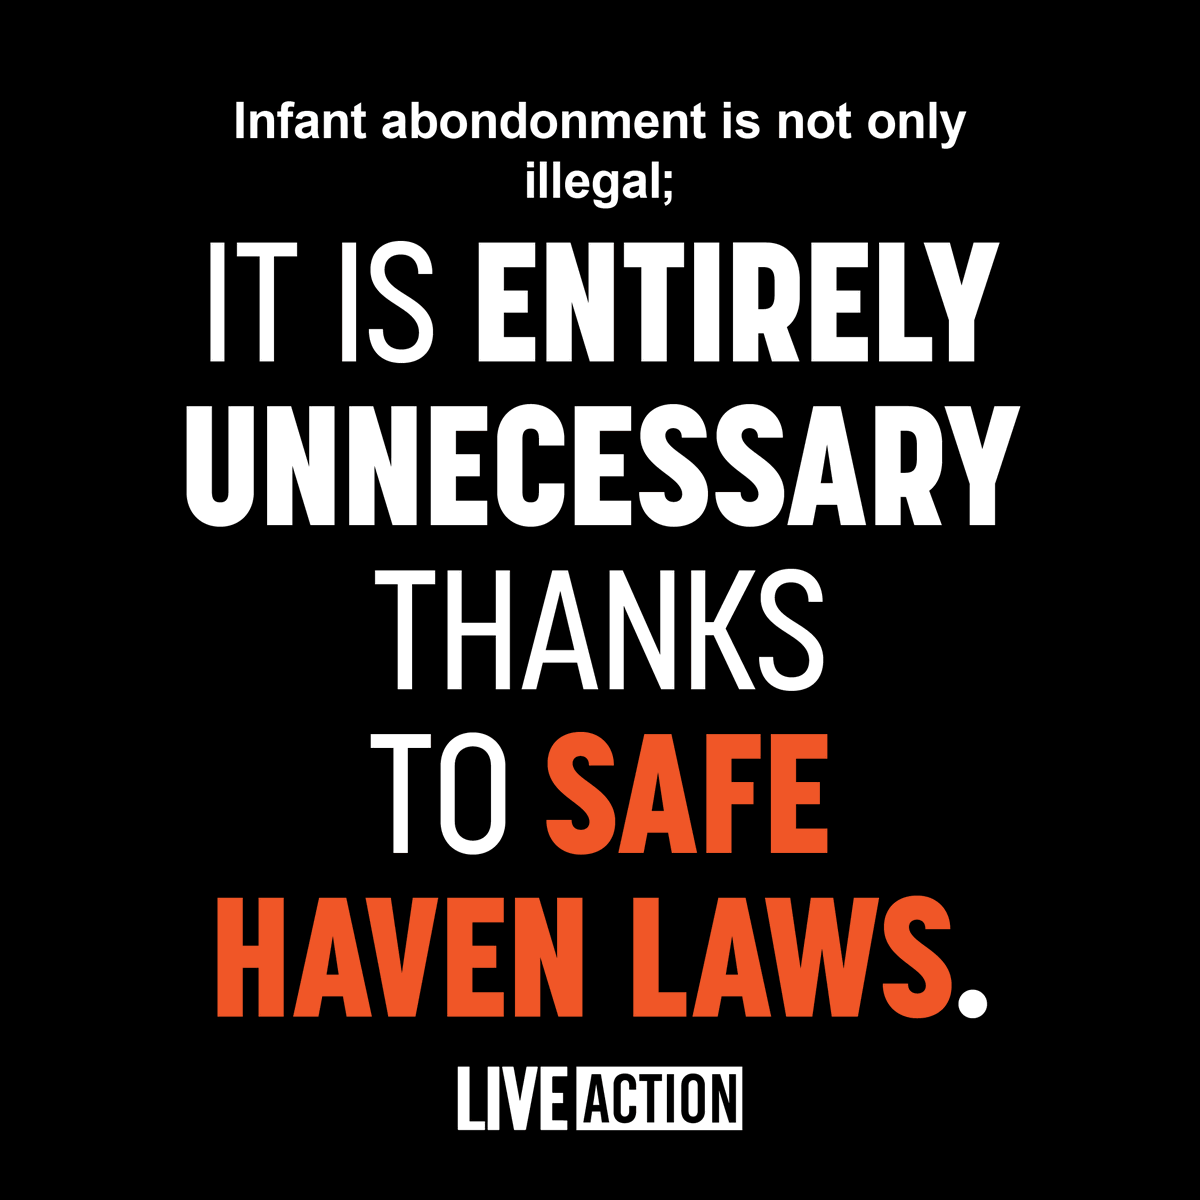 Safe Haven Laws exist in ALL 50 STATES.

They provide parents of a newborn baby, that may be unwilling or unable to care for the child, a safe and anonymous option to surrender parental rights. A newborn can be given to a Safe Haven provider with no legal consequences if the…